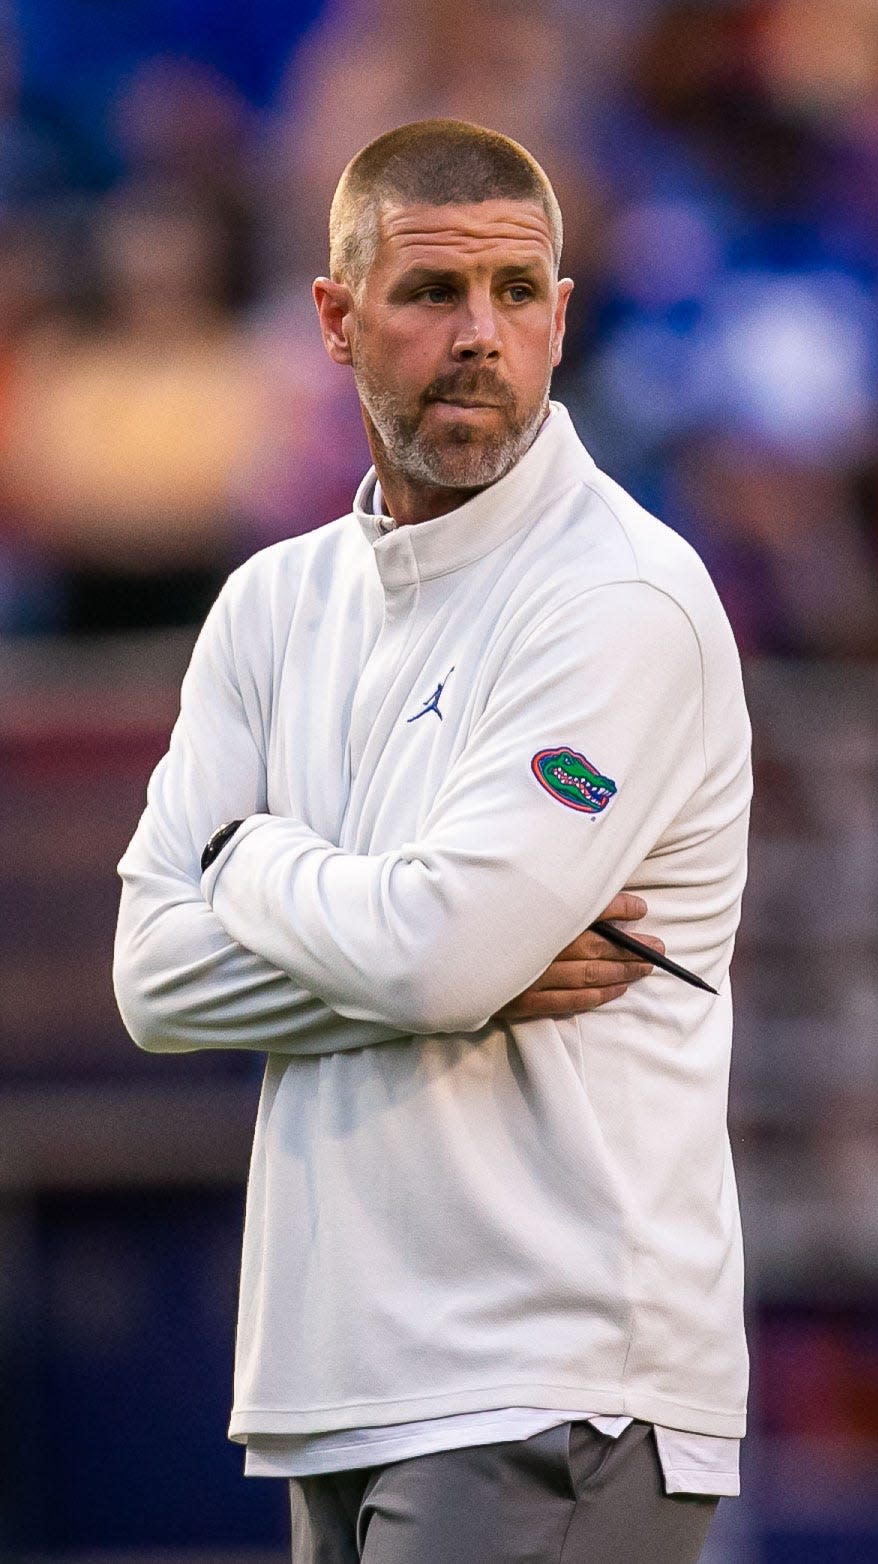 Florida Gators head football coach Billy Napier watches during the annual Orange and Blue spring game at Ben Hill Griffin Stadium in Gainesville on April 14.